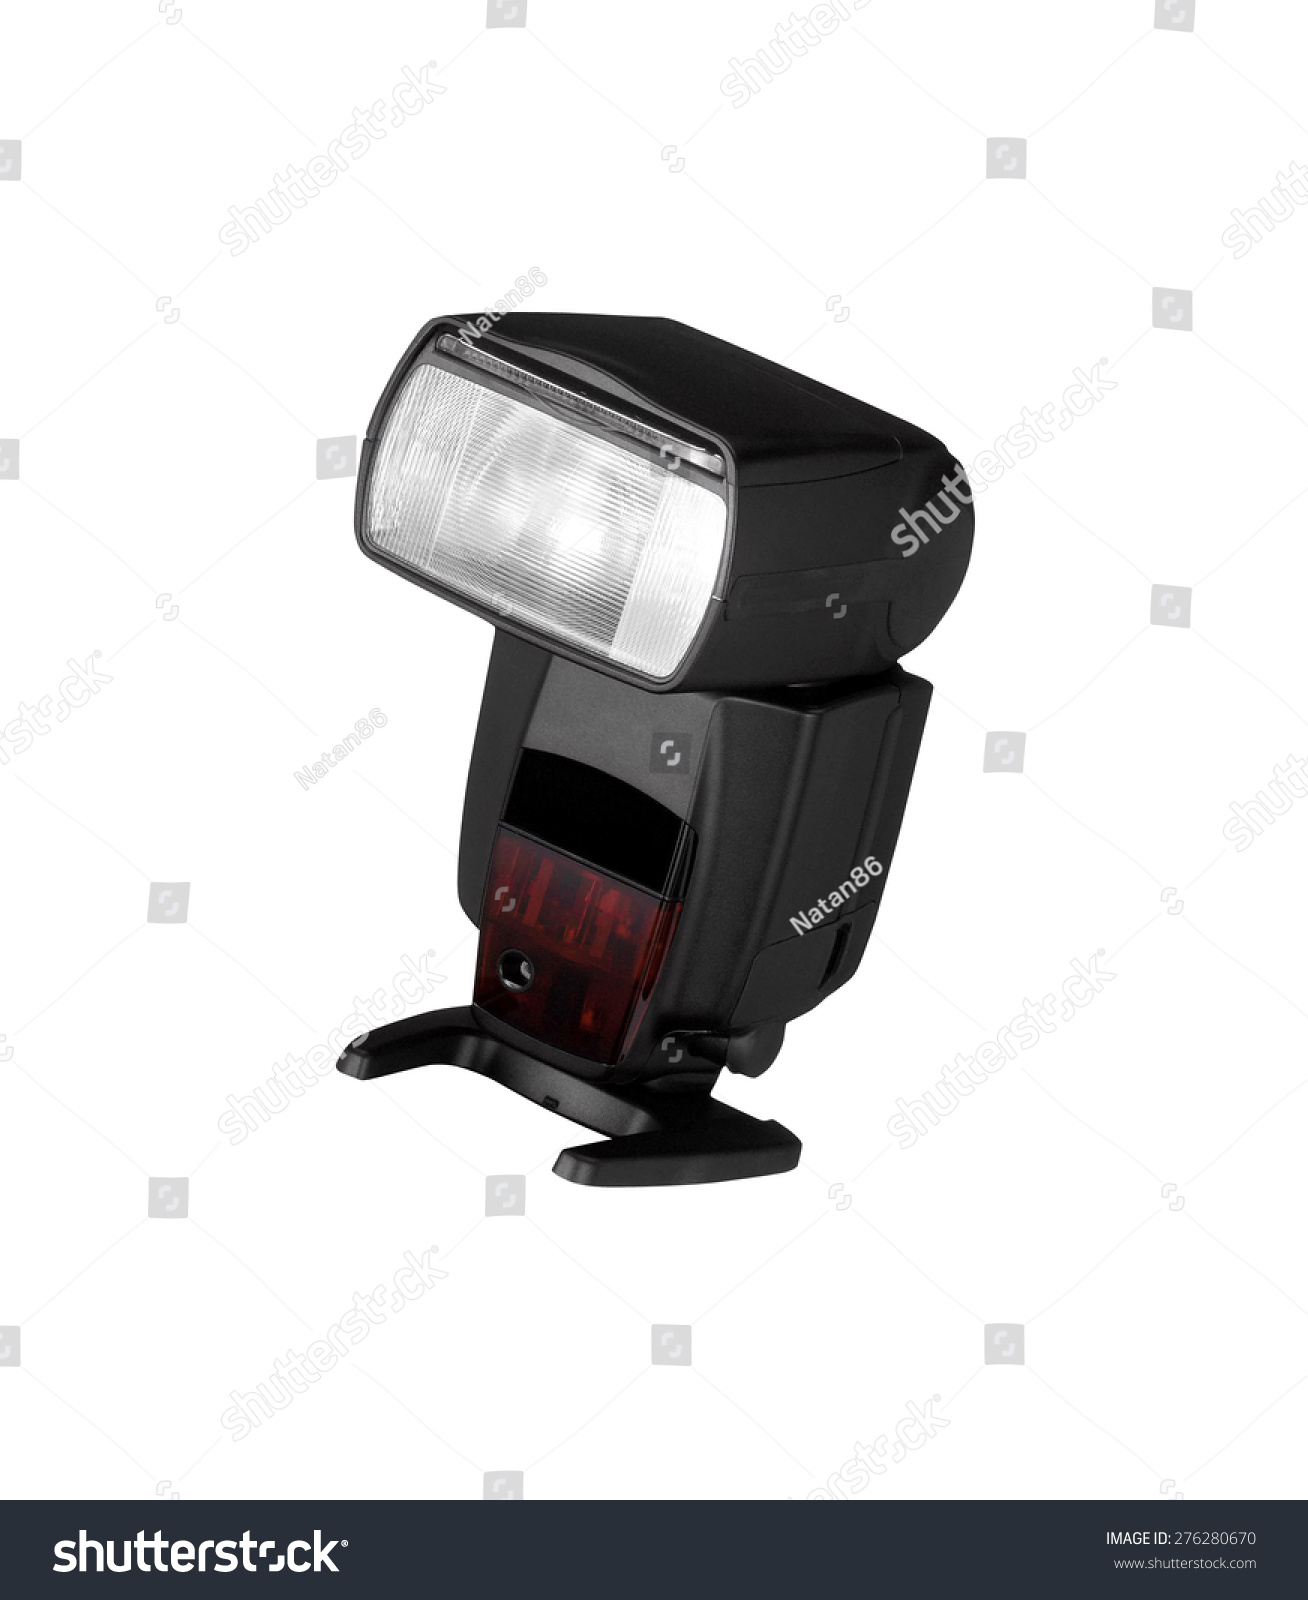 Camera Flash Isolated On White Stock Photo 276280670 - Shutterstock